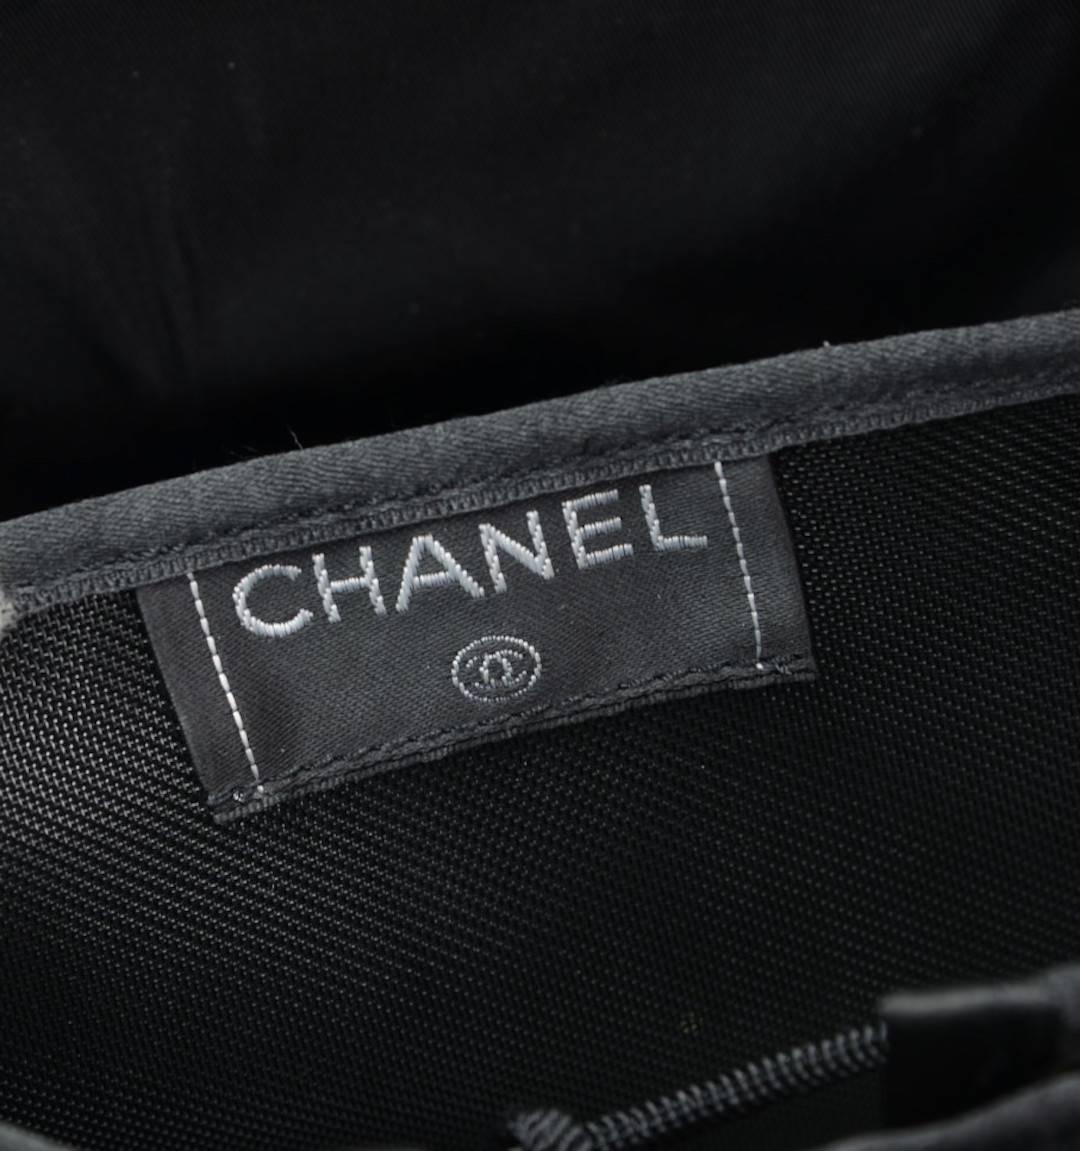 Chanel Rare Limited Edition Black Lambskin Leather Butt Evening Shoulder Bag 2